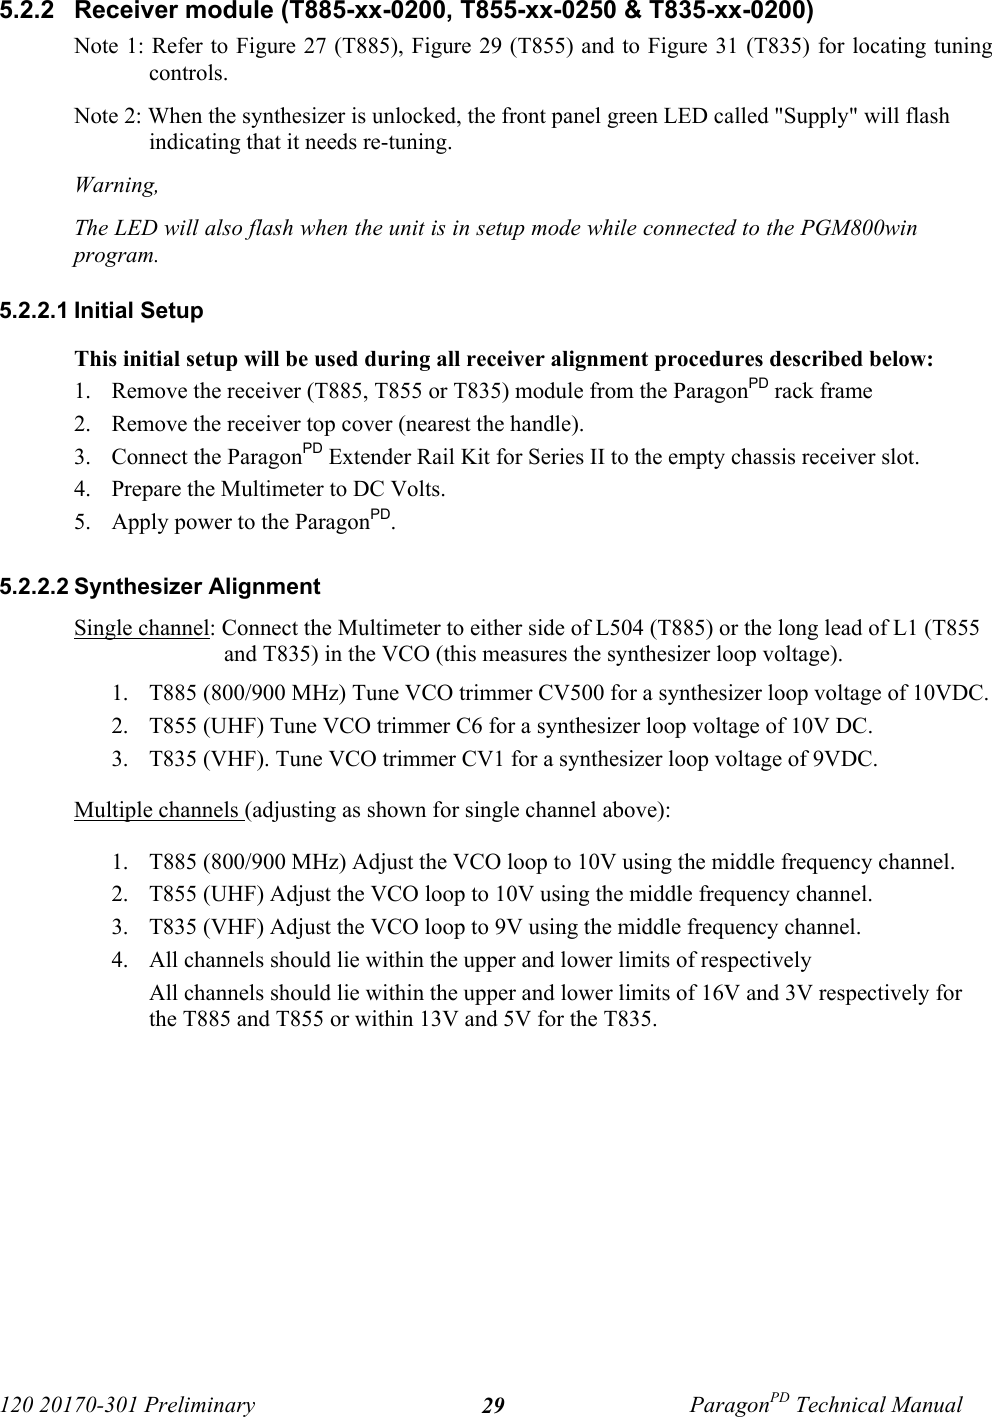 120 20170-301 Preliminary ParagonPD Technical Manual295.2.2  Receiver module (T885-xx-0200, T855-xx-0250 &amp; T835-xx-0200)Note 1: Refer to Figure 27 (T885), Figure 29 (T855) and to Figure 31 (T835) for locating tuningcontrols.Note 2: When the synthesizer is unlocked, the front panel green LED called &quot;Supply&quot; will flashindicating that it needs re-tuning. Warning, The LED will also flash when the unit is in setup mode while connected to the PGM800winprogram. 5.2.2.1 Initial SetupThis initial setup will be used during all receiver alignment procedures described below:1. Remove the receiver (T885, T855 or T835) module from the ParagonPD rack frame2. Remove the receiver top cover (nearest the handle).3. Connect the ParagonPD Extender Rail Kit for Series II to the empty chassis receiver slot.4. Prepare the Multimeter to DC Volts.5. Apply power to the ParagonPD.5.2.2.2 Synthesizer AlignmentSingle channel: Connect the Multimeter to either side of L504 (T885) or the long lead of L1 (T855and T835) in the VCO (this measures the synthesizer loop voltage). 1. T885 (800/900 MHz) Tune VCO trimmer CV500 for a synthesizer loop voltage of 10VDC.2. T855 (UHF) Tune VCO trimmer C6 for a synthesizer loop voltage of 10V DC.3. T835 (VHF). Tune VCO trimmer CV1 for a synthesizer loop voltage of 9VDC.Multiple channels (adjusting as shown for single channel above): 1. T885 (800/900 MHz) Adjust the VCO loop to 10V using the middle frequency channel. 2. T855 (UHF) Adjust the VCO loop to 10V using the middle frequency channel. 3. T835 (VHF) Adjust the VCO loop to 9V using the middle frequency channel. 4. All channels should lie within the upper and lower limits of respectivelyAll channels should lie within the upper and lower limits of 16V and 3V respectively forthe T885 and T855 or within 13V and 5V for the T835.